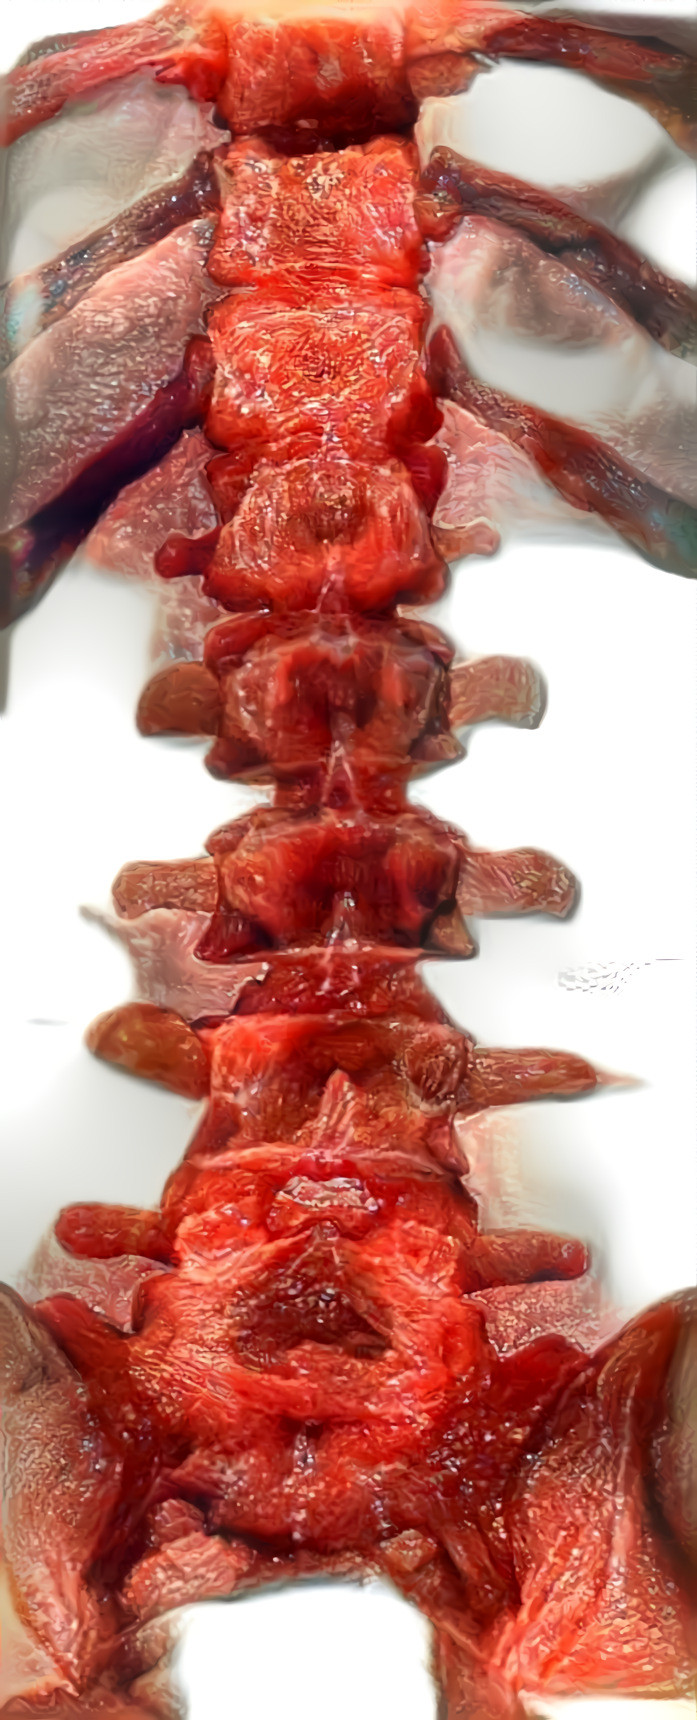 spine x-ray retextured with meat